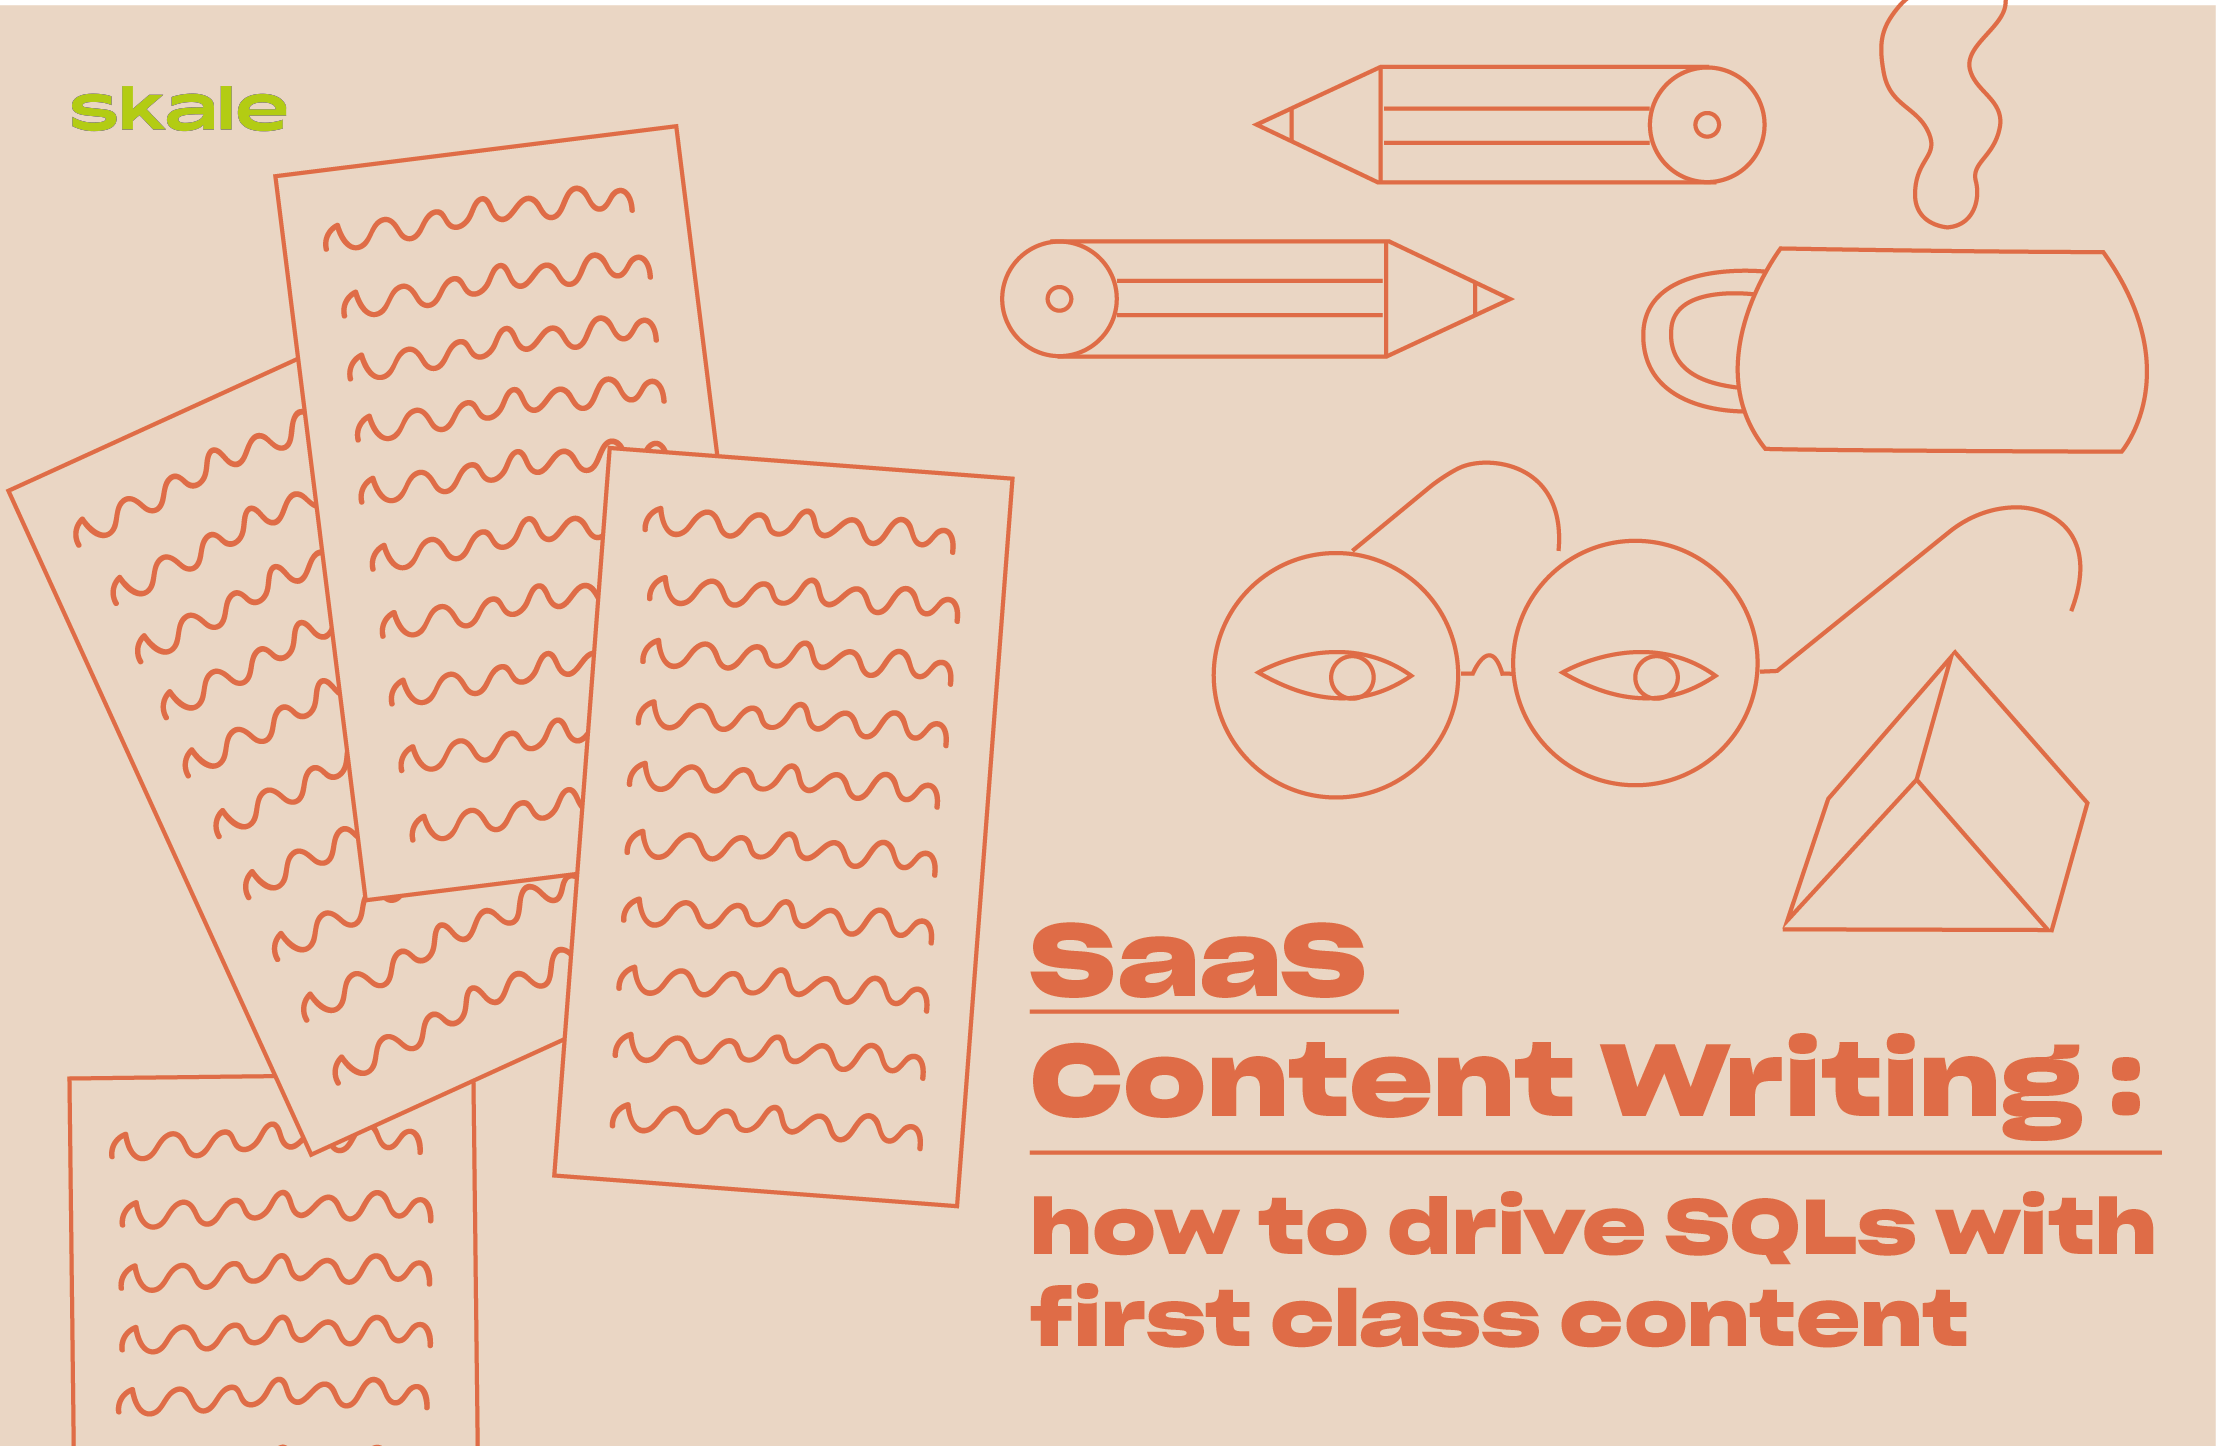 SaaS Content Writing: How to Drive SQLs with 1st Class Content